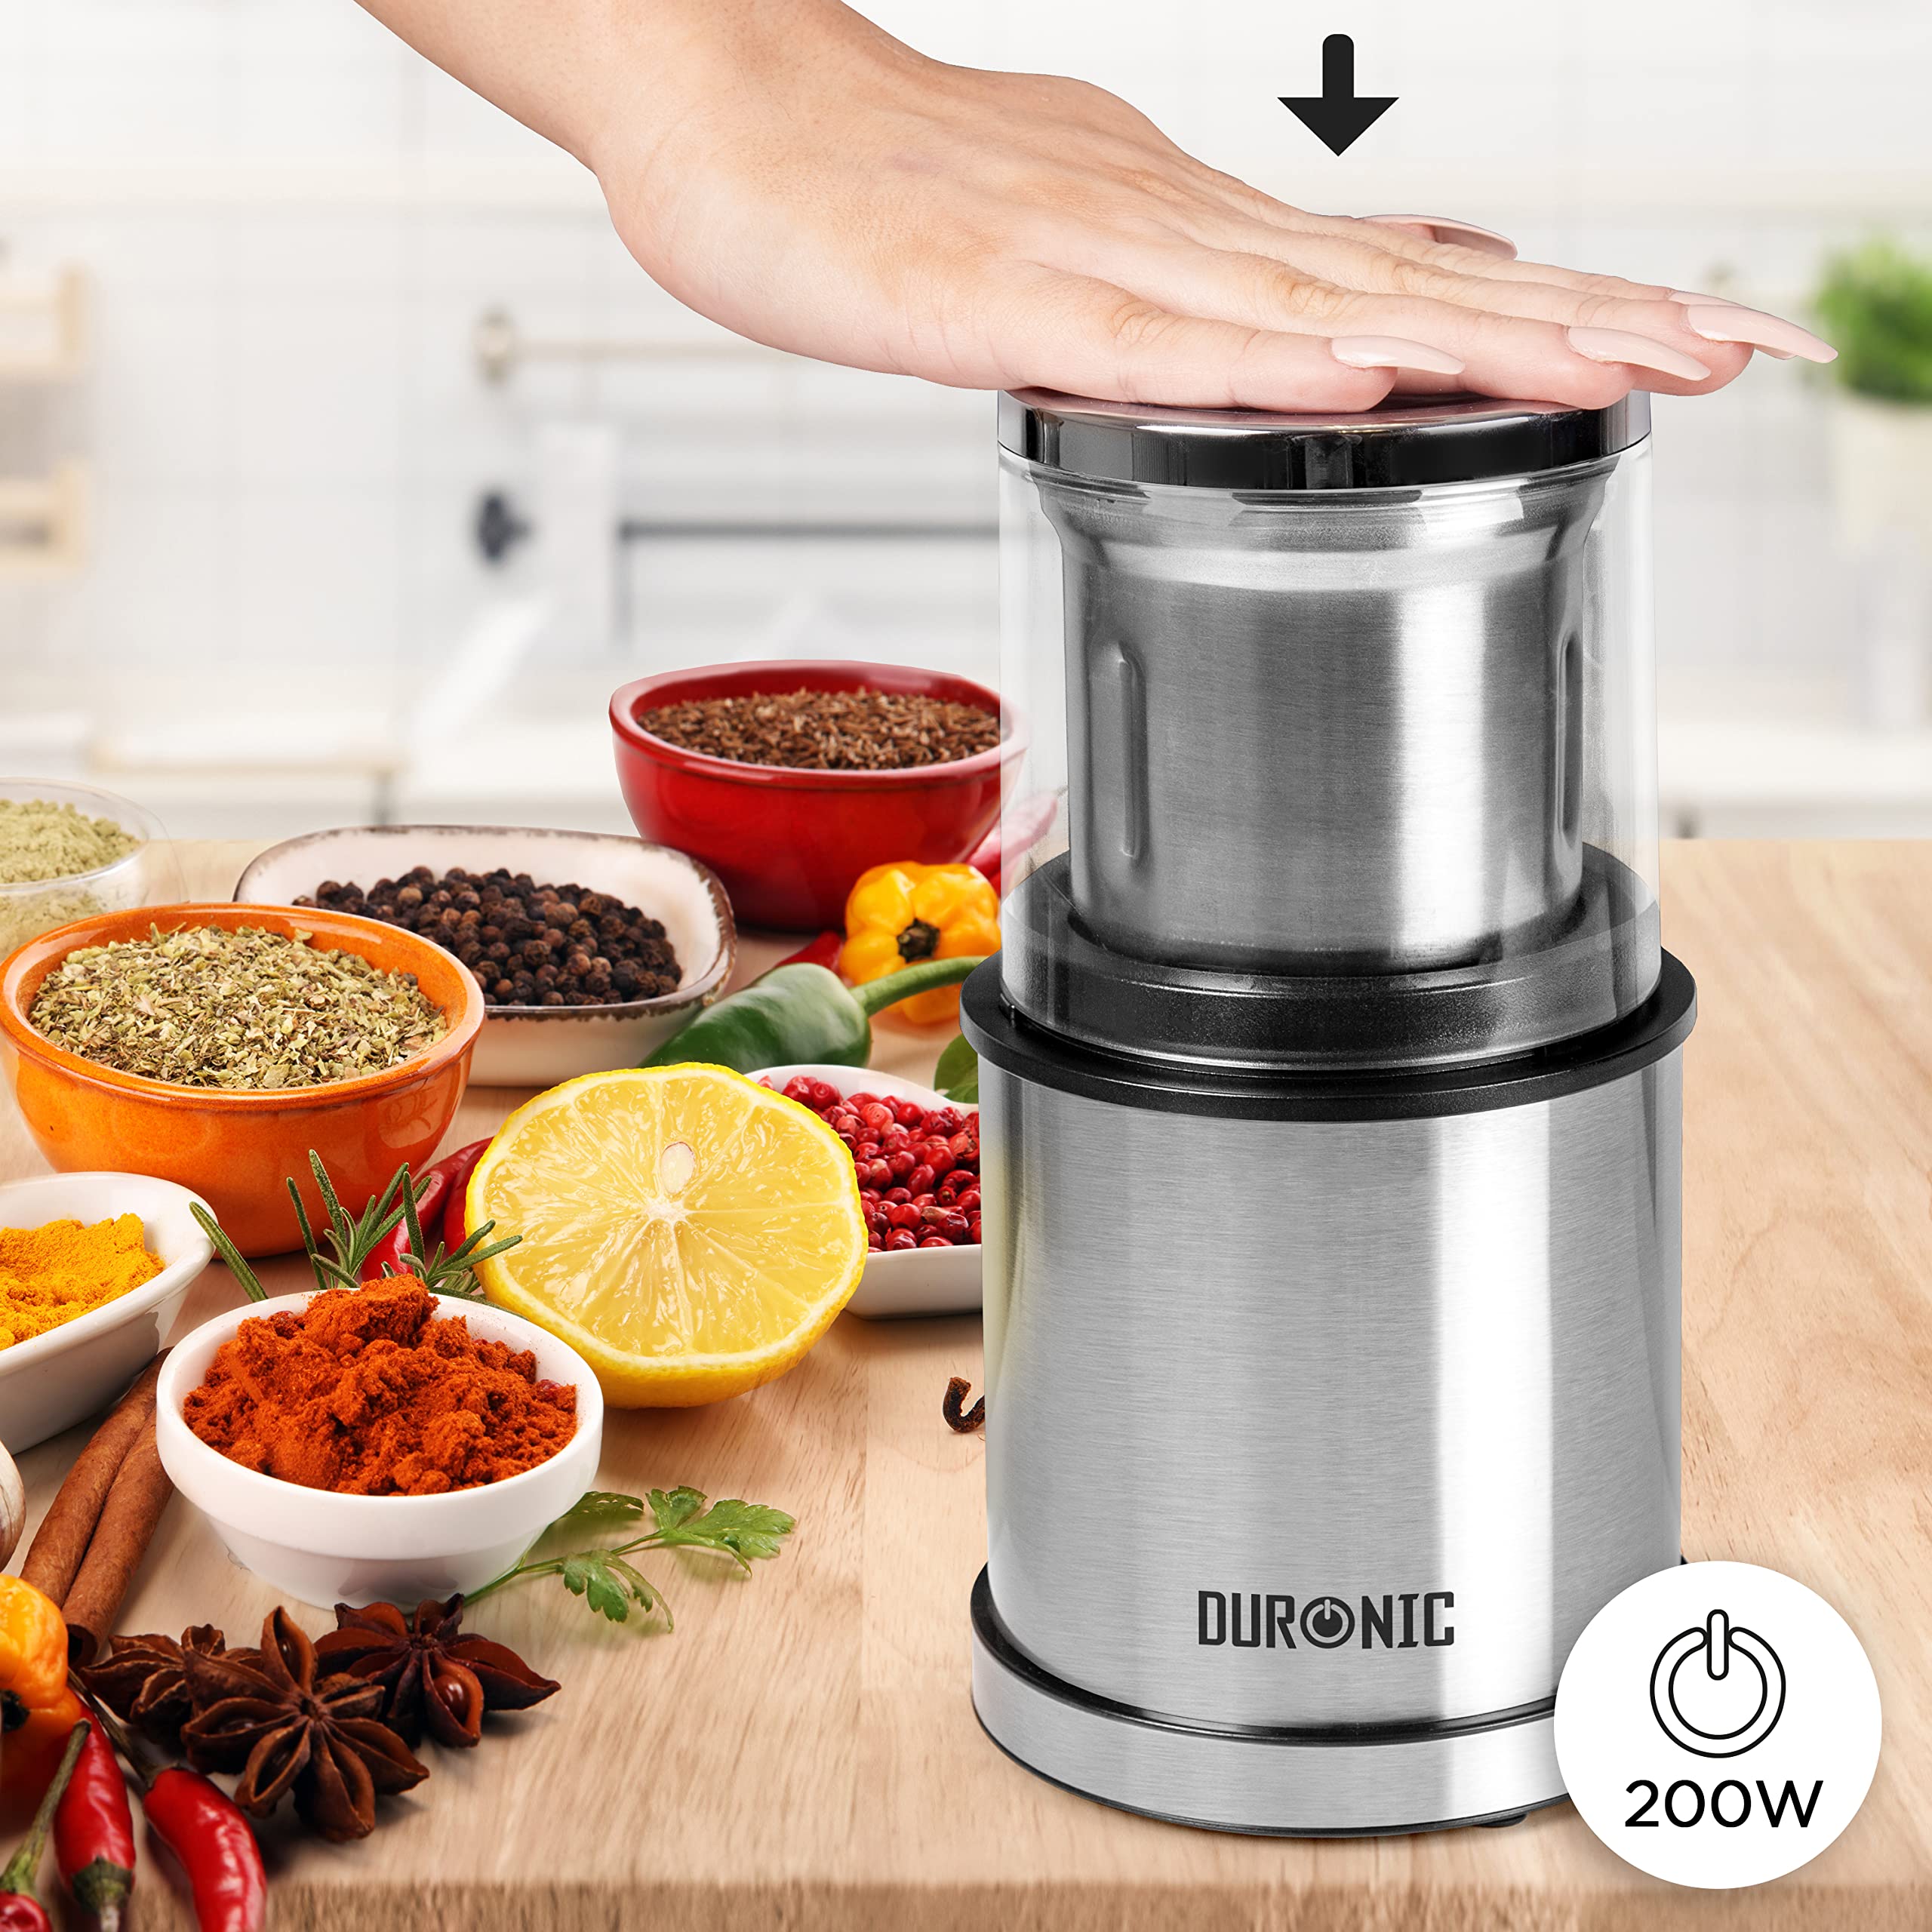 Duronic Electric Blade Coffee Grinder CG421 | 2 in 1 Spice Mill Grinder Kitchen Machine | Wet & Dry Grinding Mini Mill Hopper | 75g/220ml | 200W | 2X Stainless Steel Cups | Beans, Herbs, Nuts…